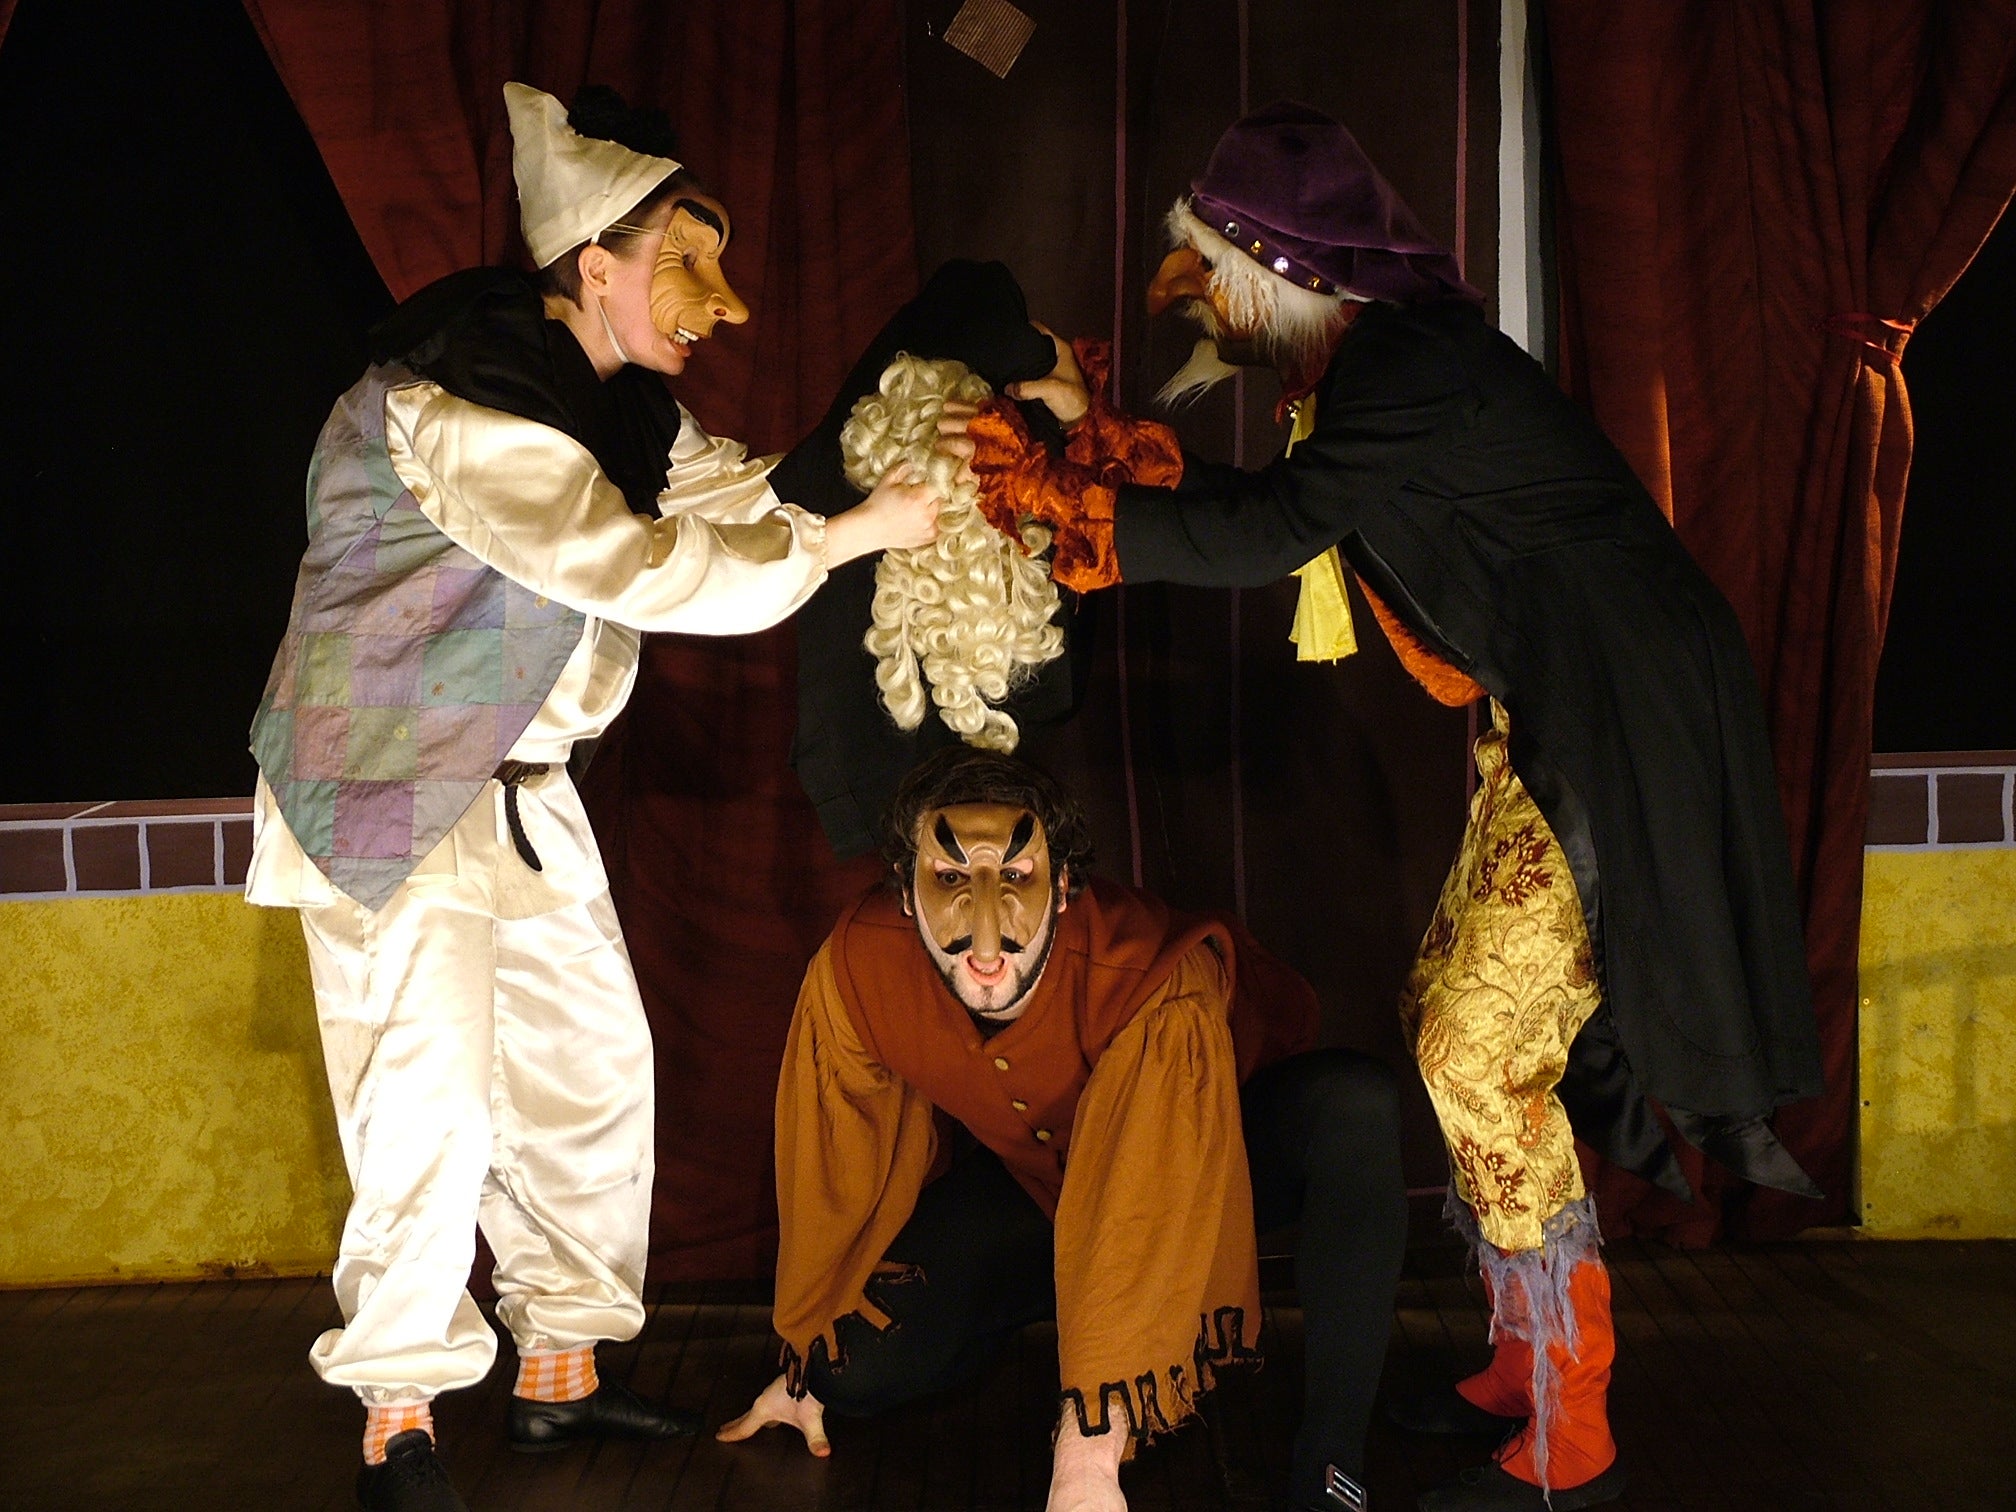 Actors in a group wearing masks on stage